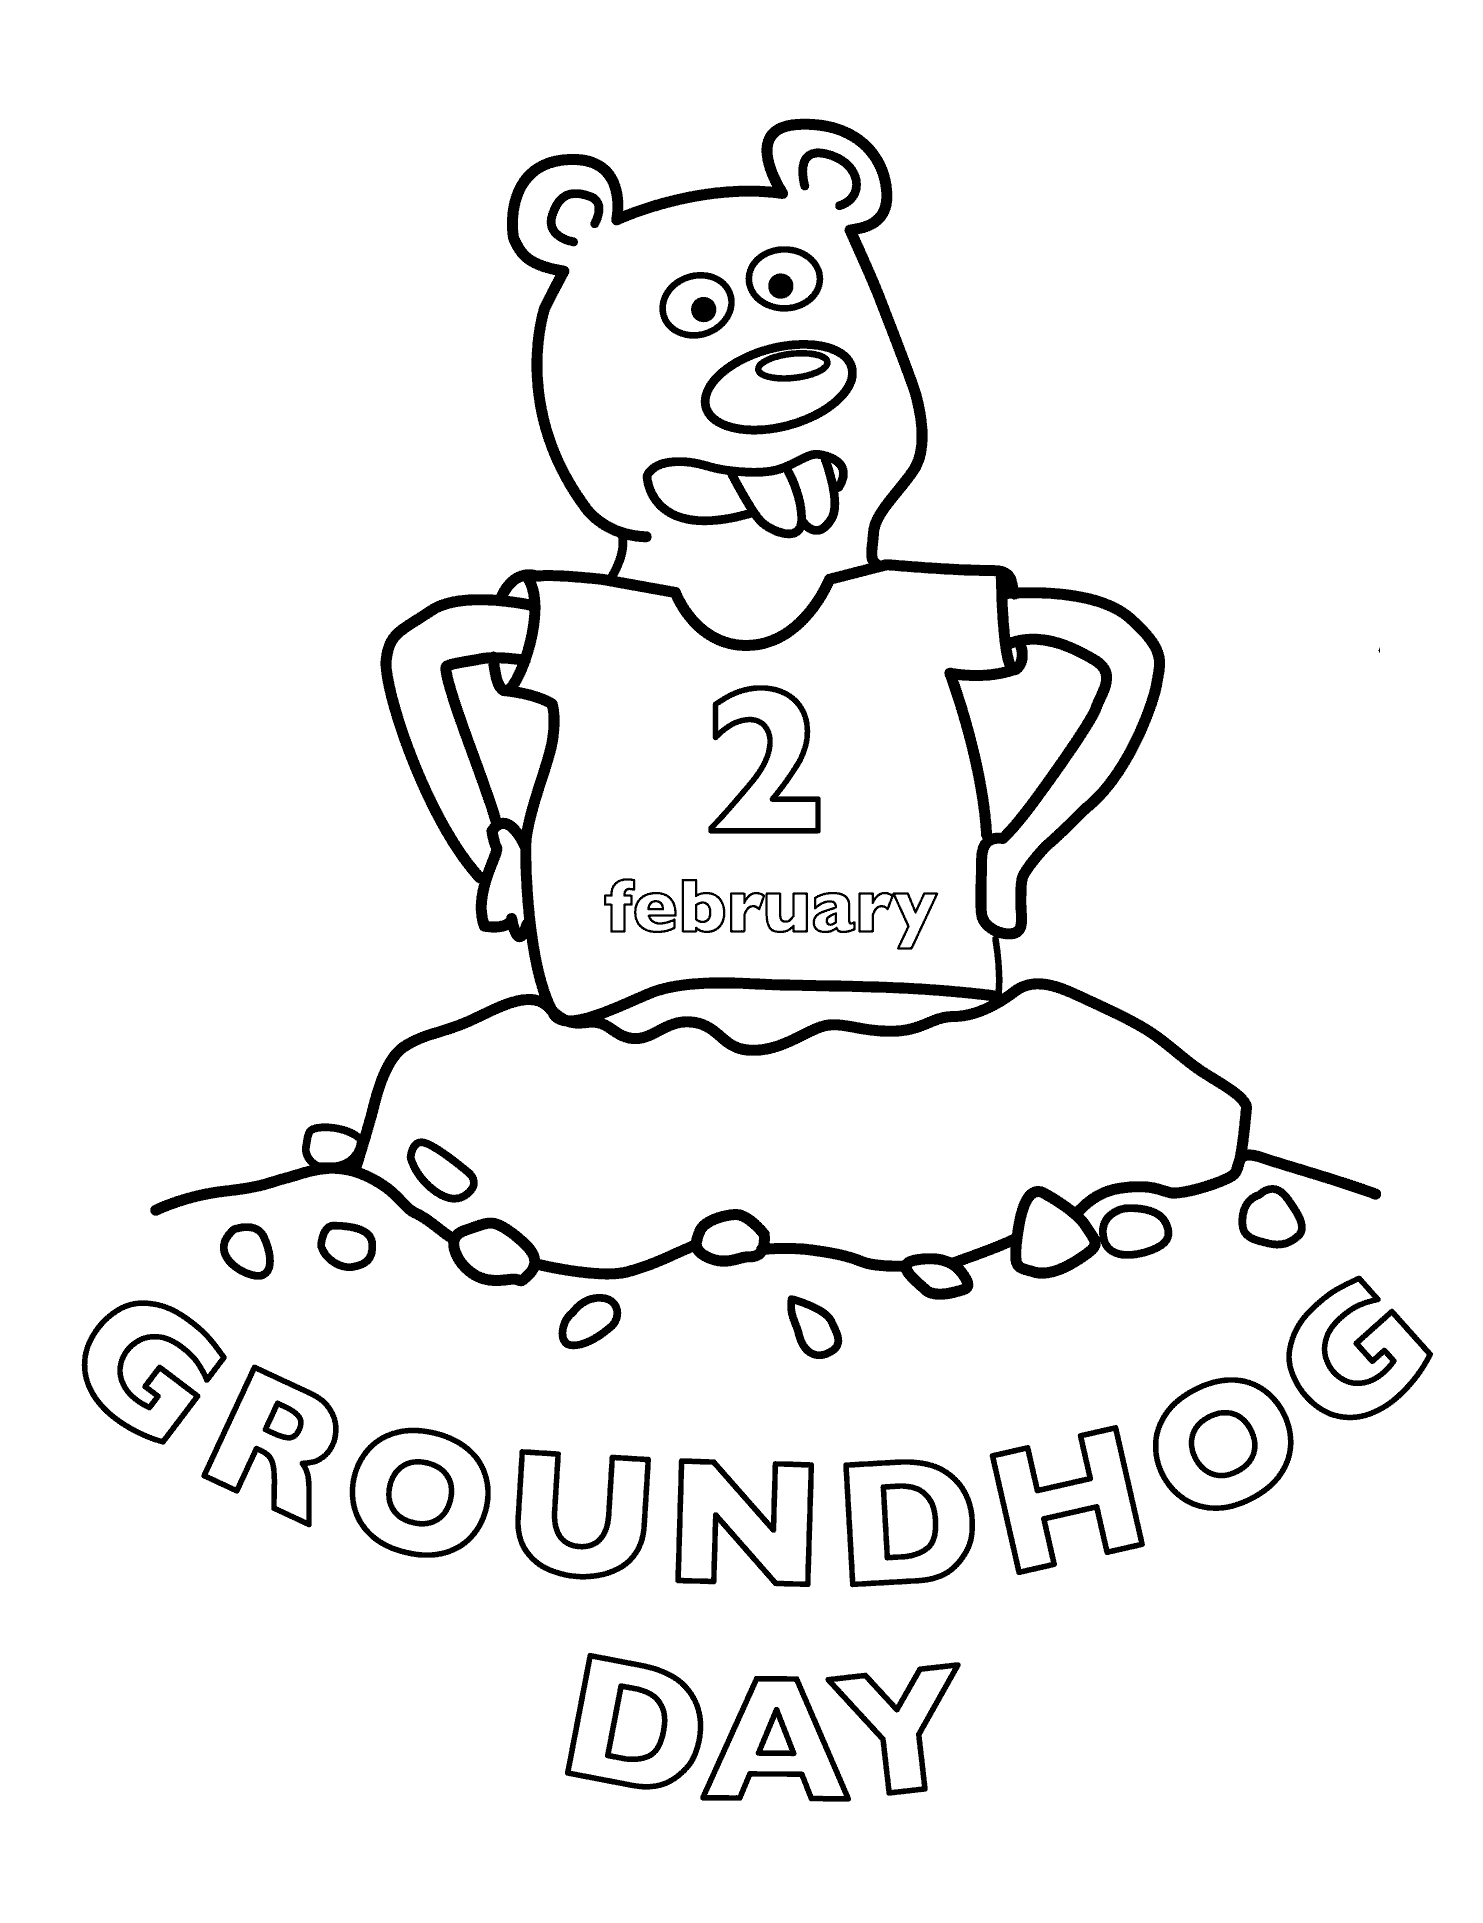 Groundhog Day Coloring Pages Holiday Groundhog Day February Printable 2021 0582 Coloring4free